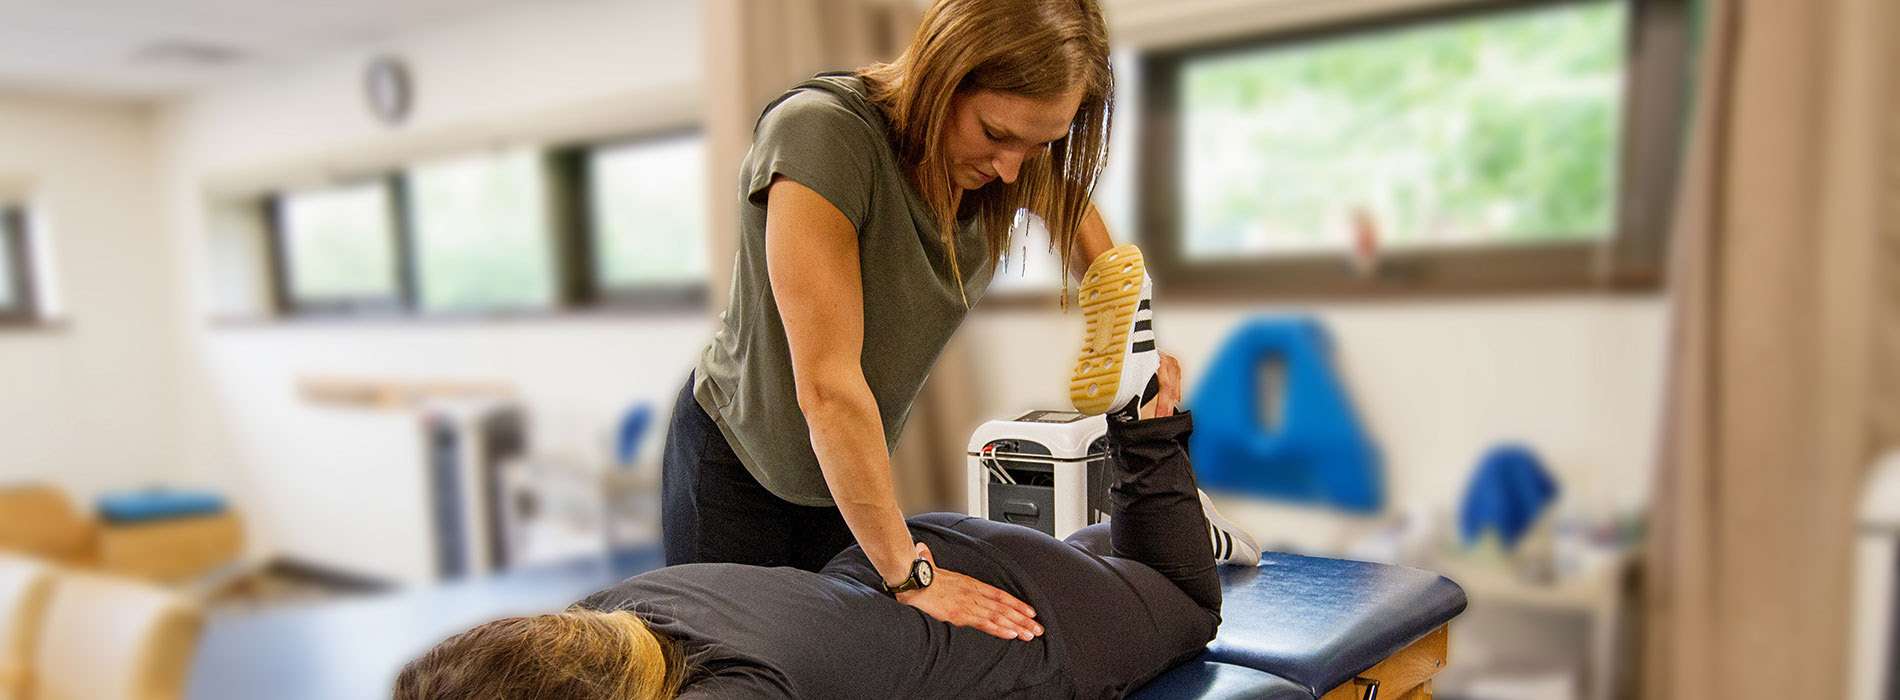 Physical Therapy Facilities That Accept Medicaid